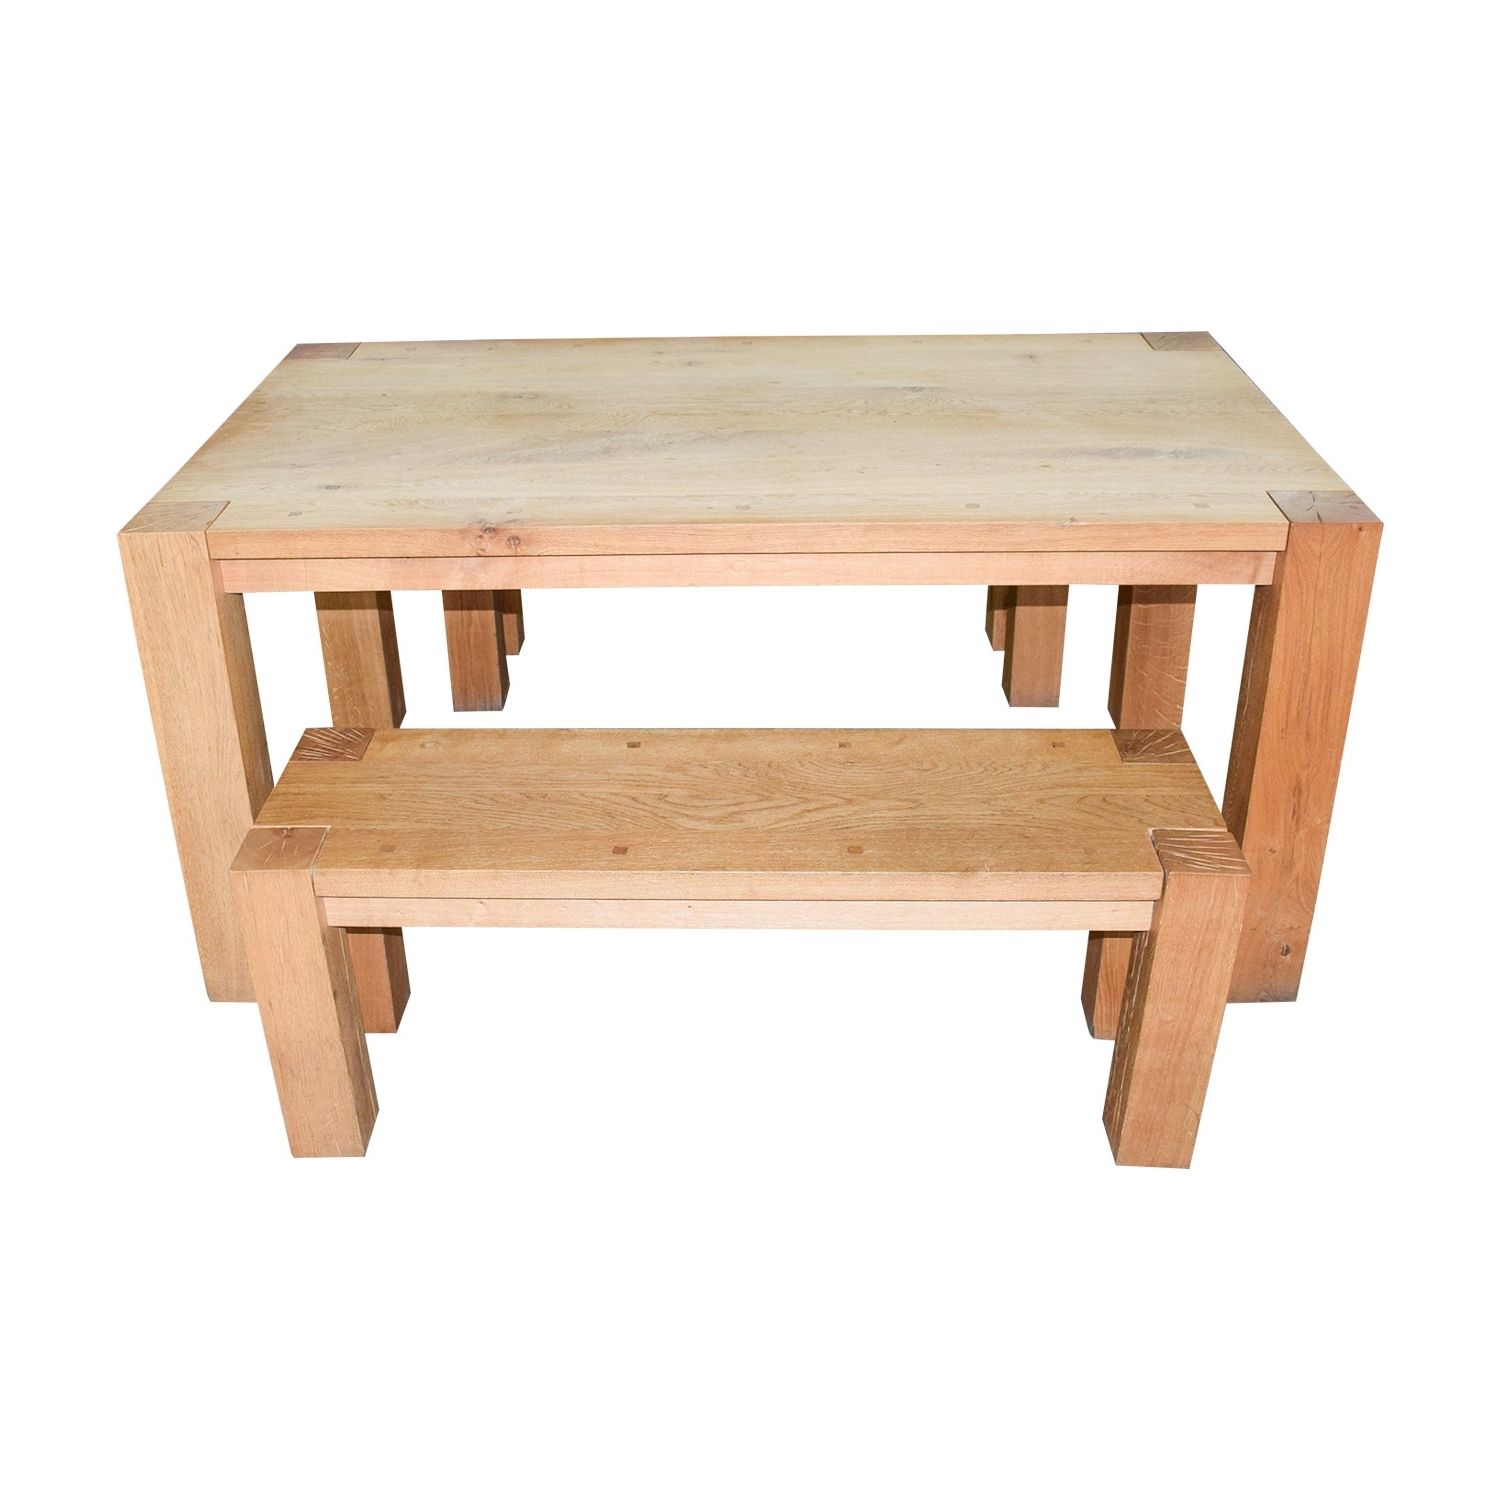 [%76% Off – Crate & Barrel Crate & Barrel Big Sur Natural Dining Table Within Best And Newest Big Dining Tables For Sale|big Dining Tables For Sale With 2018 76% Off – Crate & Barrel Crate & Barrel Big Sur Natural Dining Table|2018 Big Dining Tables For Sale Throughout 76% Off – Crate & Barrel Crate & Barrel Big Sur Natural Dining Table|most Popular 76% Off – Crate & Barrel Crate & Barrel Big Sur Natural Dining Table For Big Dining Tables For Sale%] (View 15 of 25)